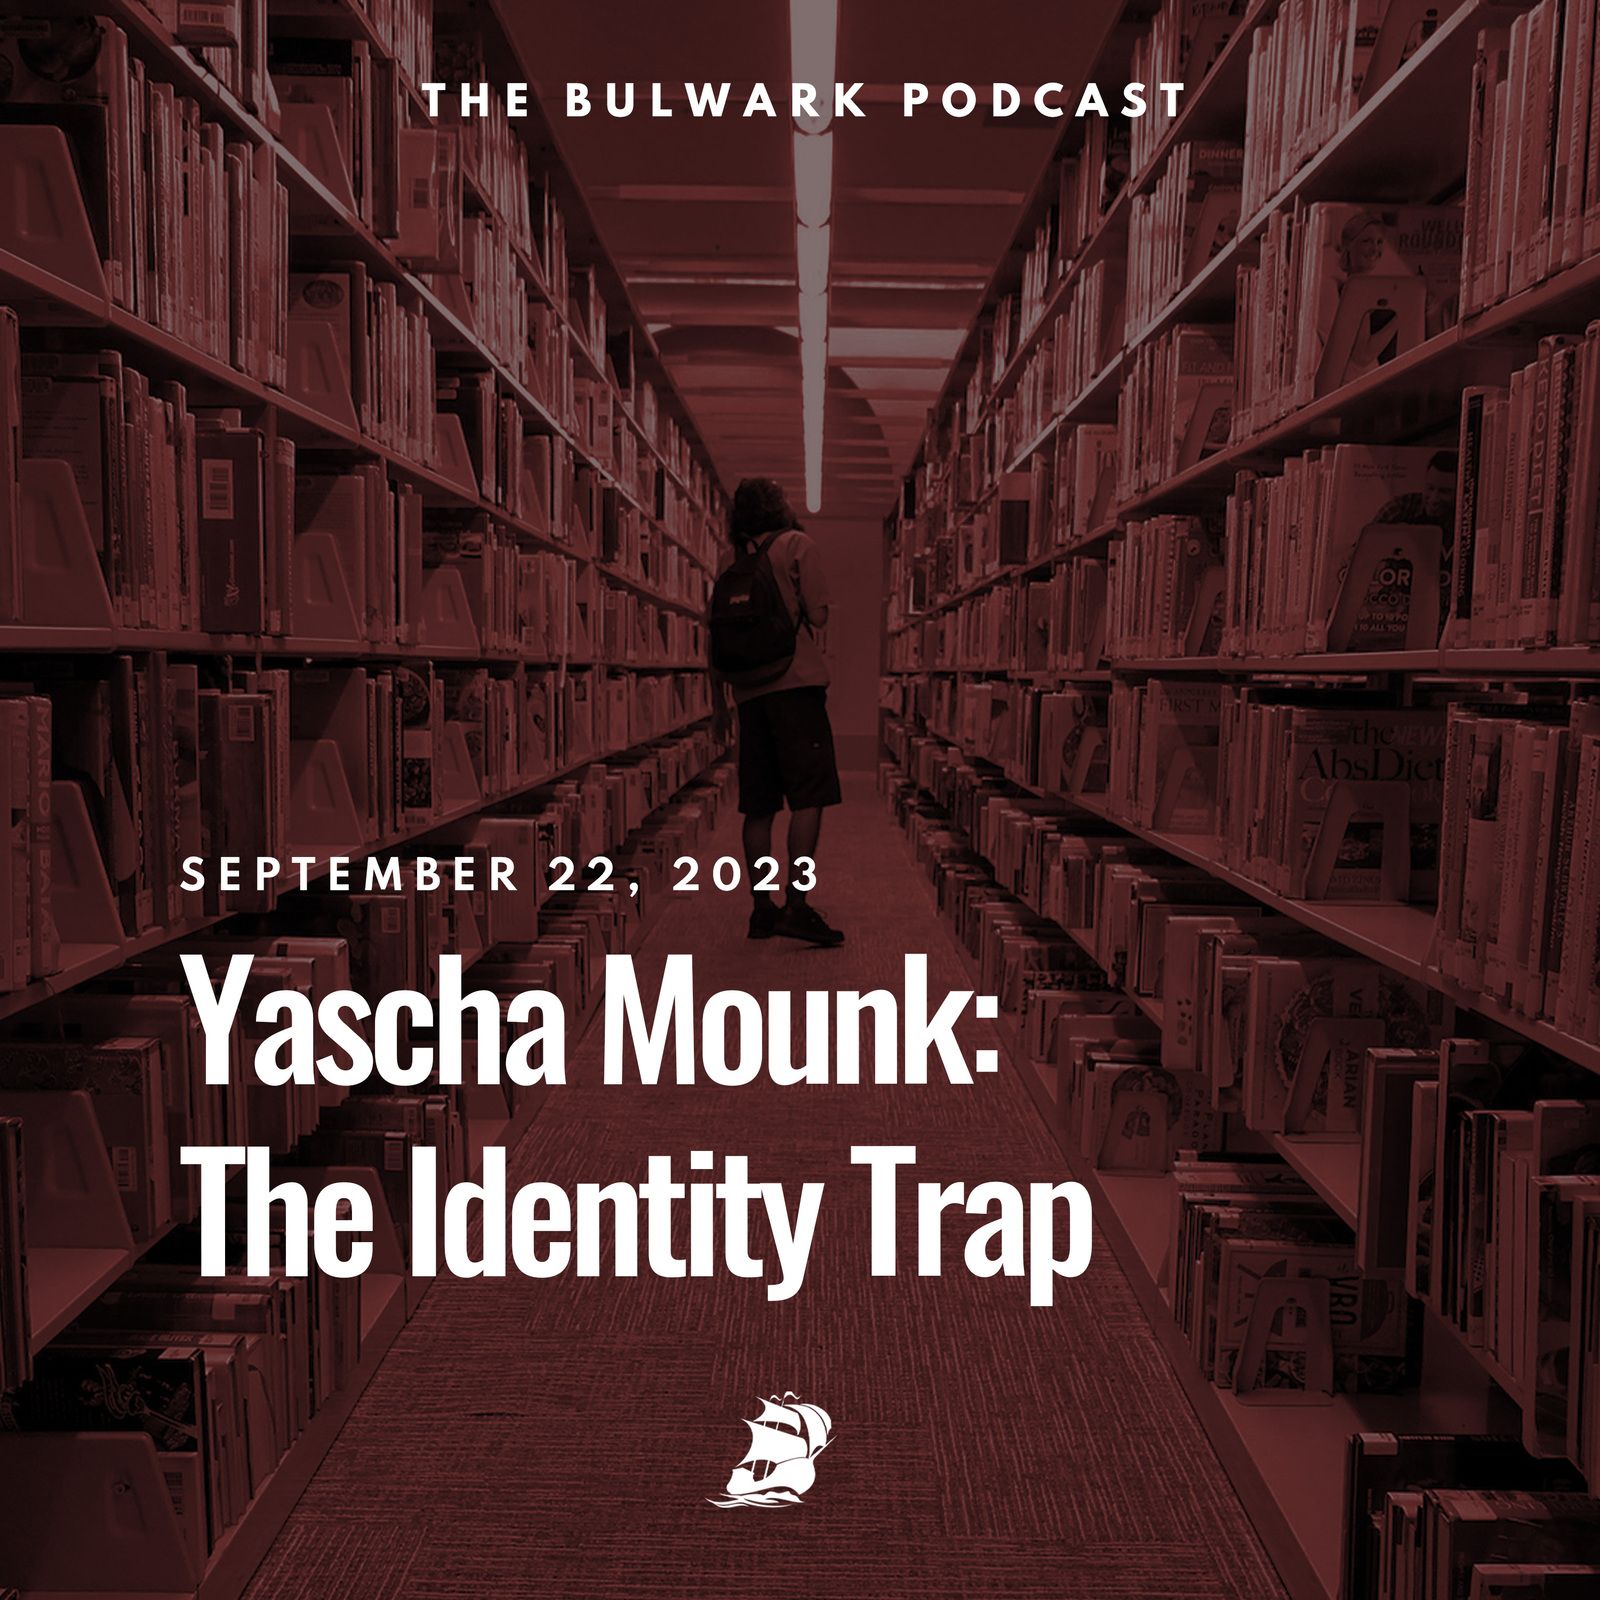 Yascha Mounk: The Identity Trap by The Bulwark Podcast